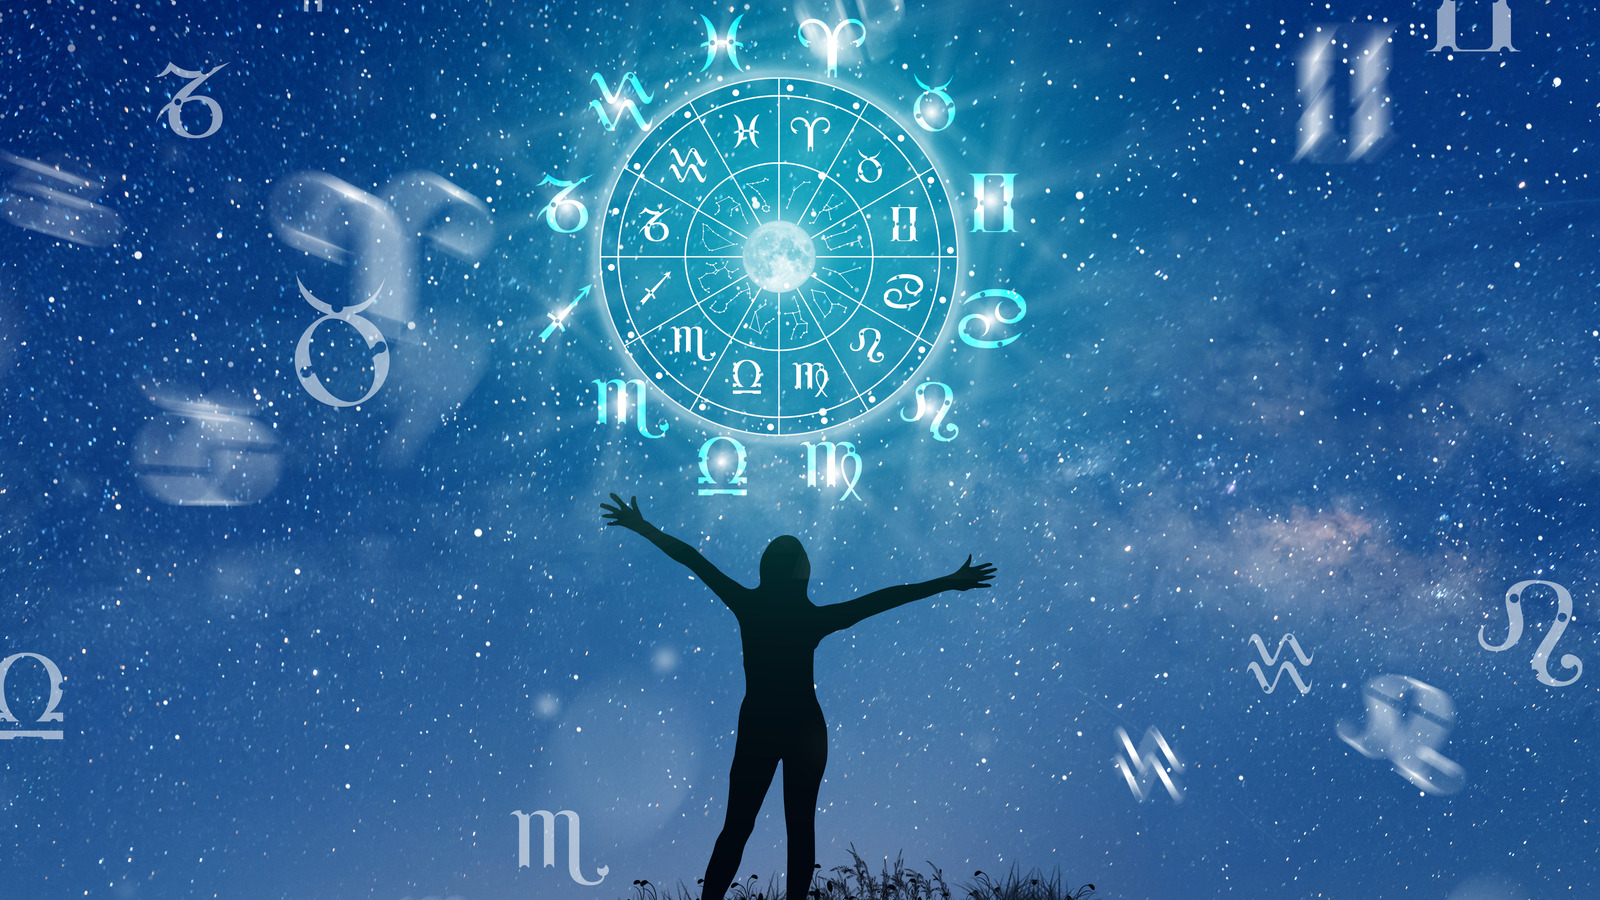 How The May 16 Full Moon Will Affect You If You're An Aquarius